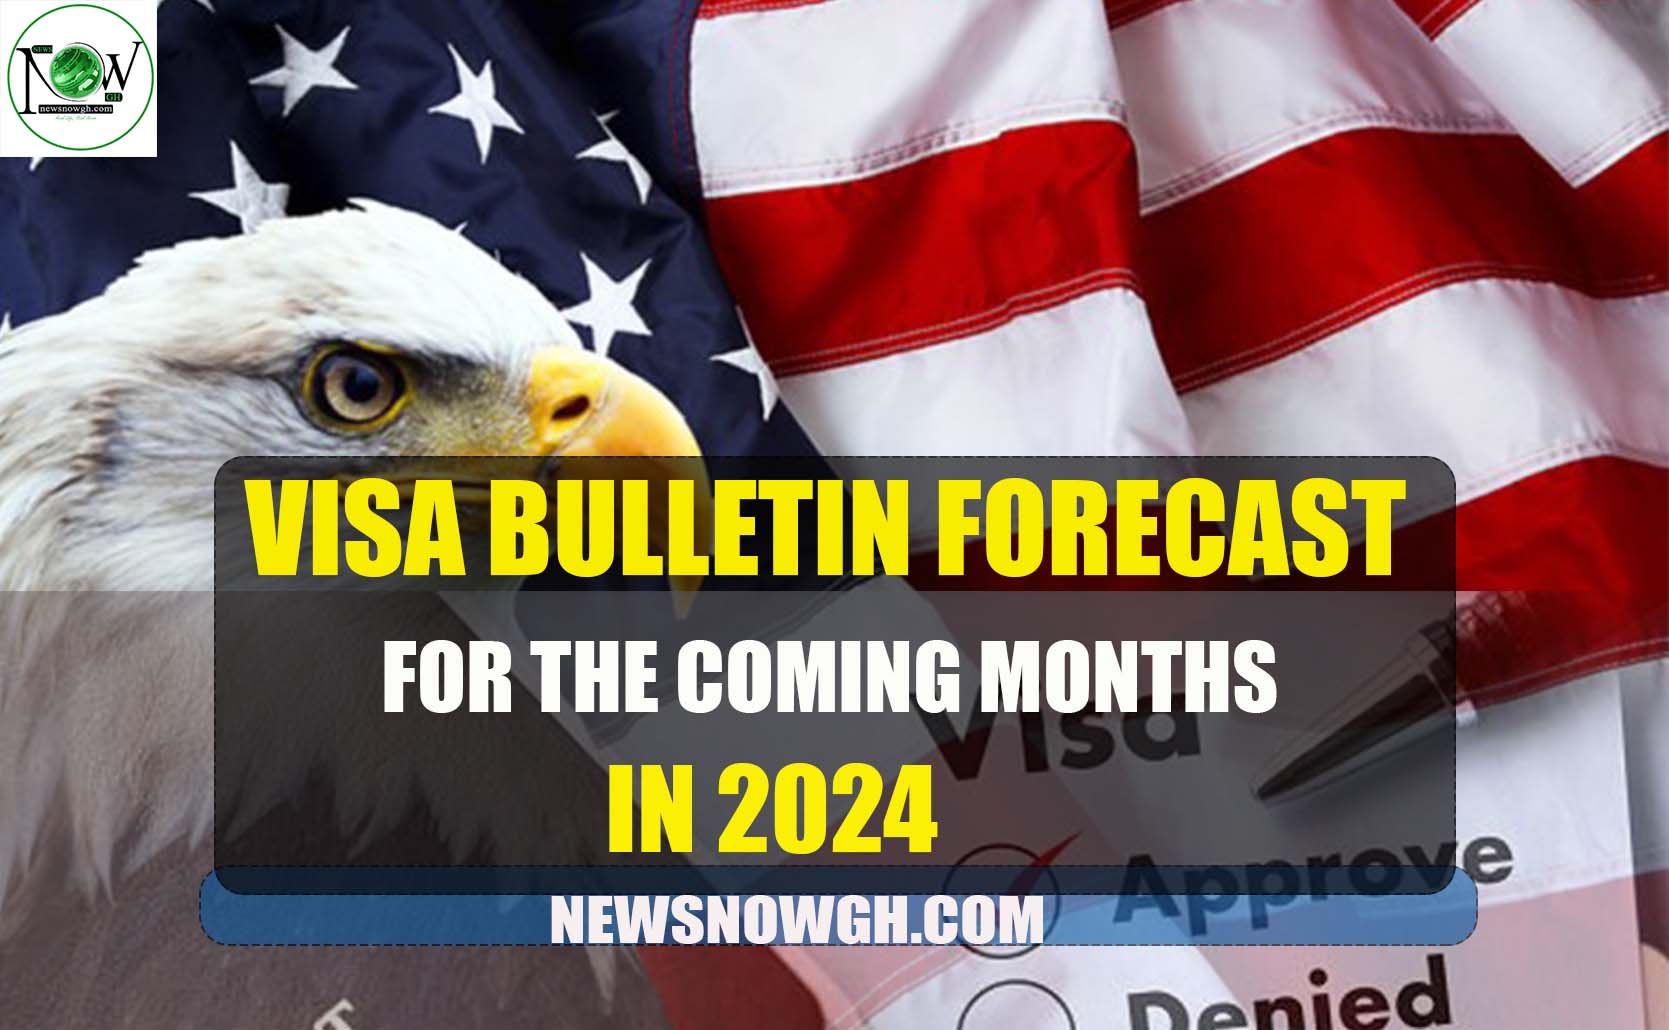 Visa Bulletin Forecast For the Coming Months in 2024